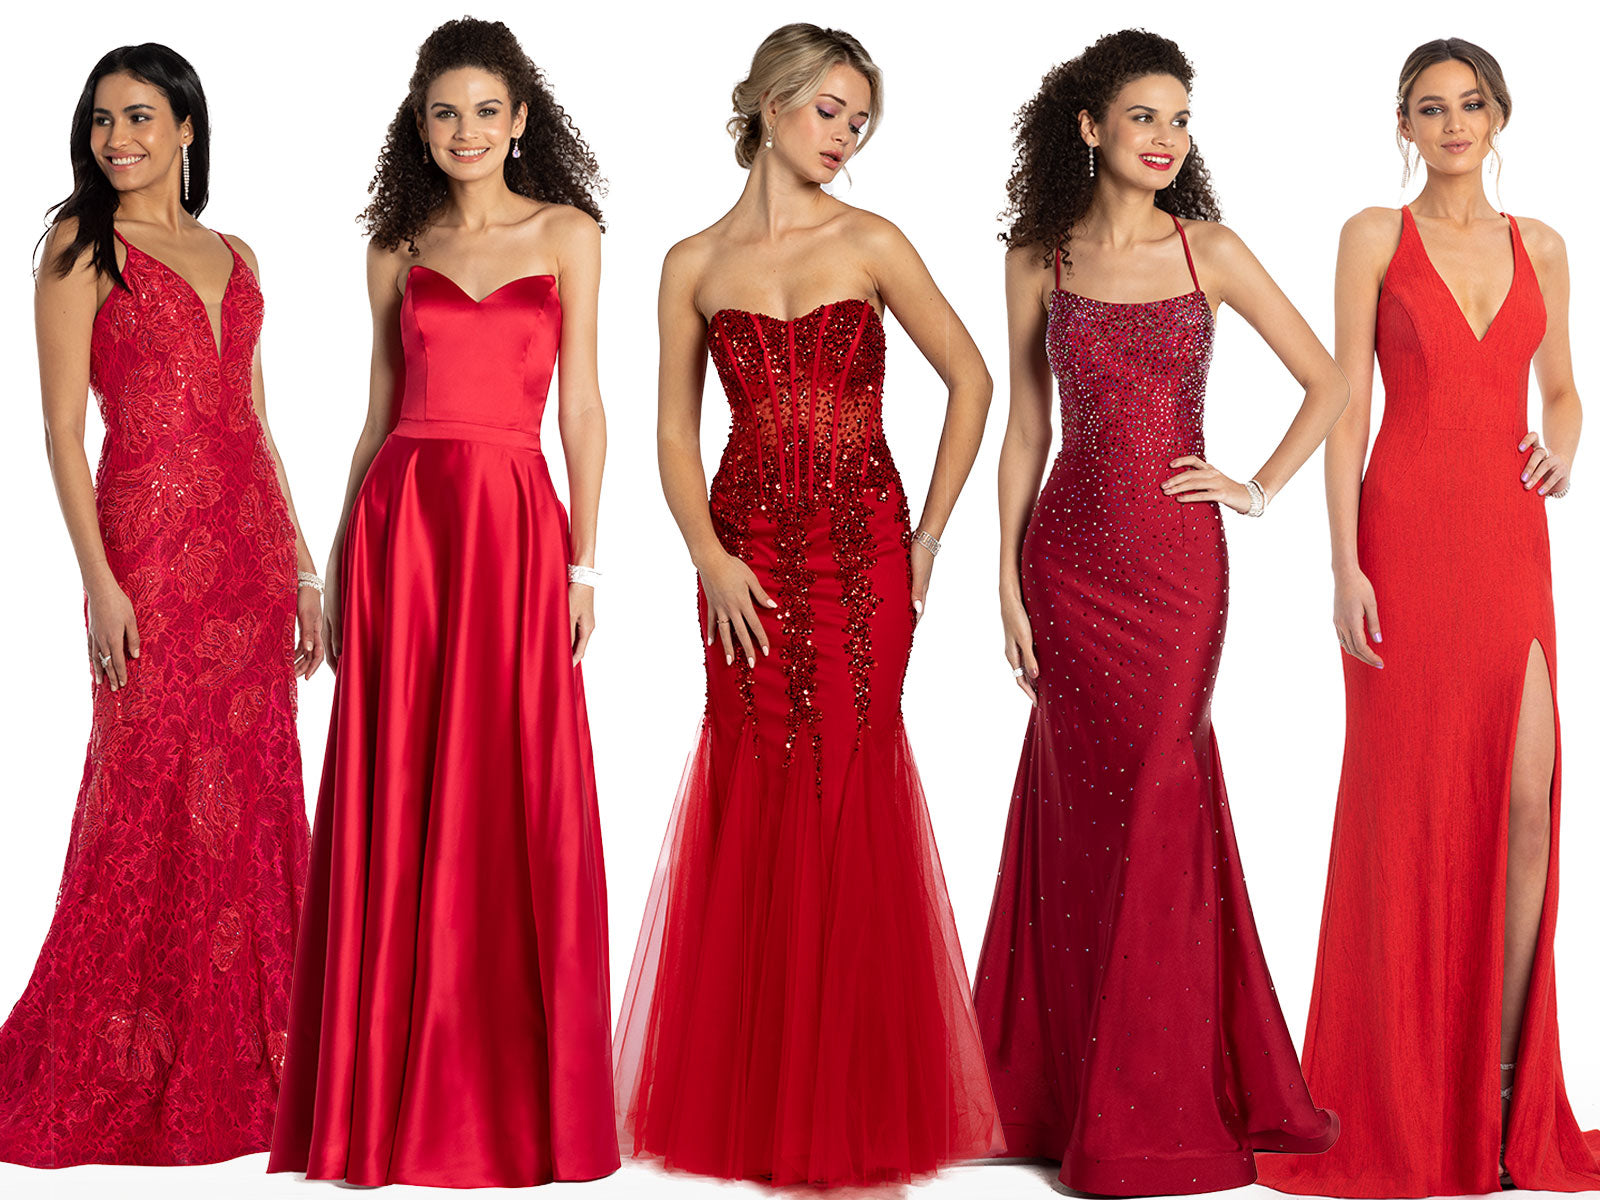 Turn Heads in Any of These Brilliant Red Prom Dresses – Camille La Vie